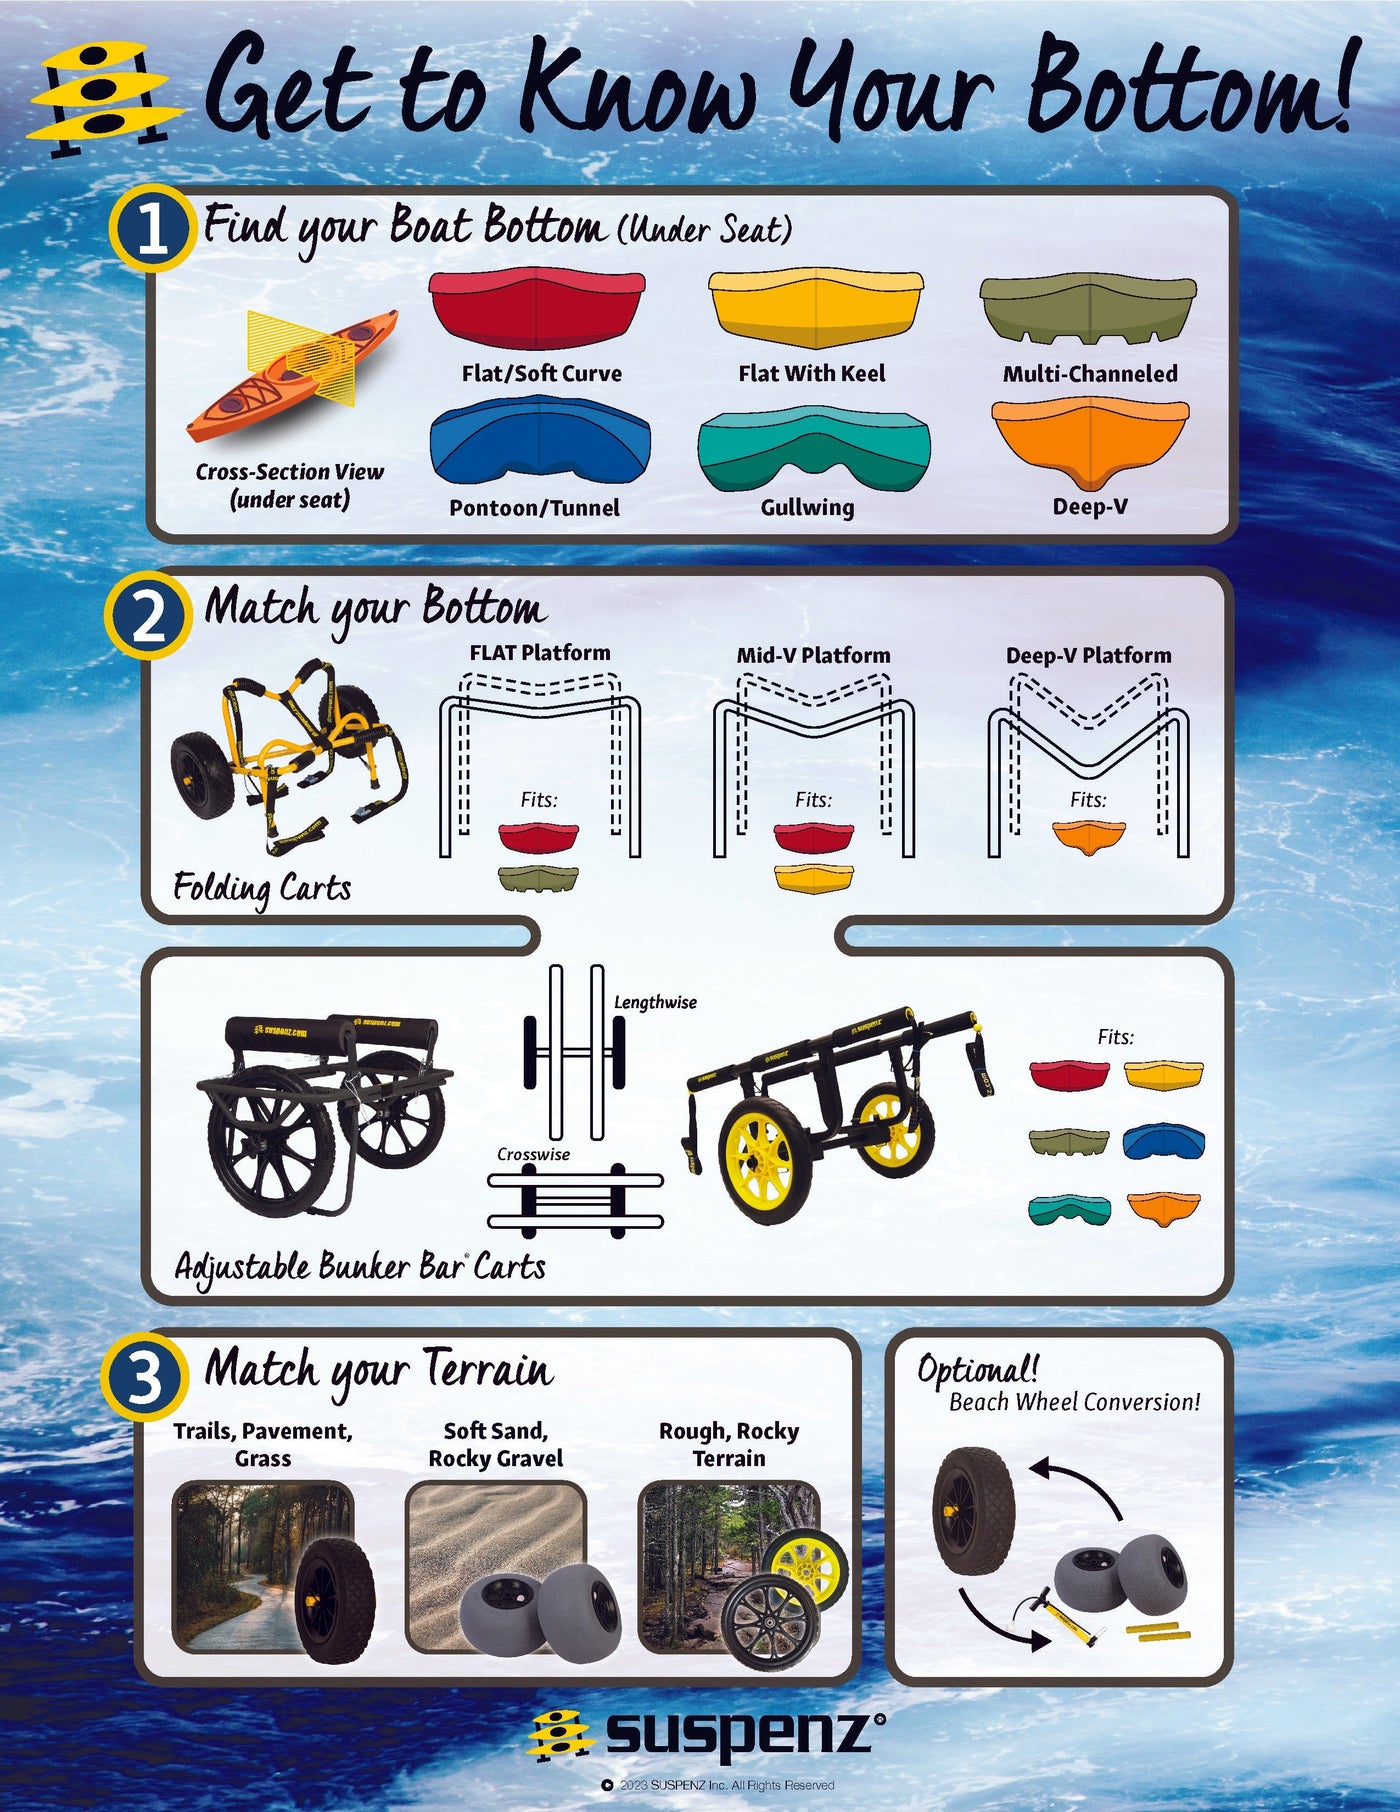 Guide for the best cart for a type of boat